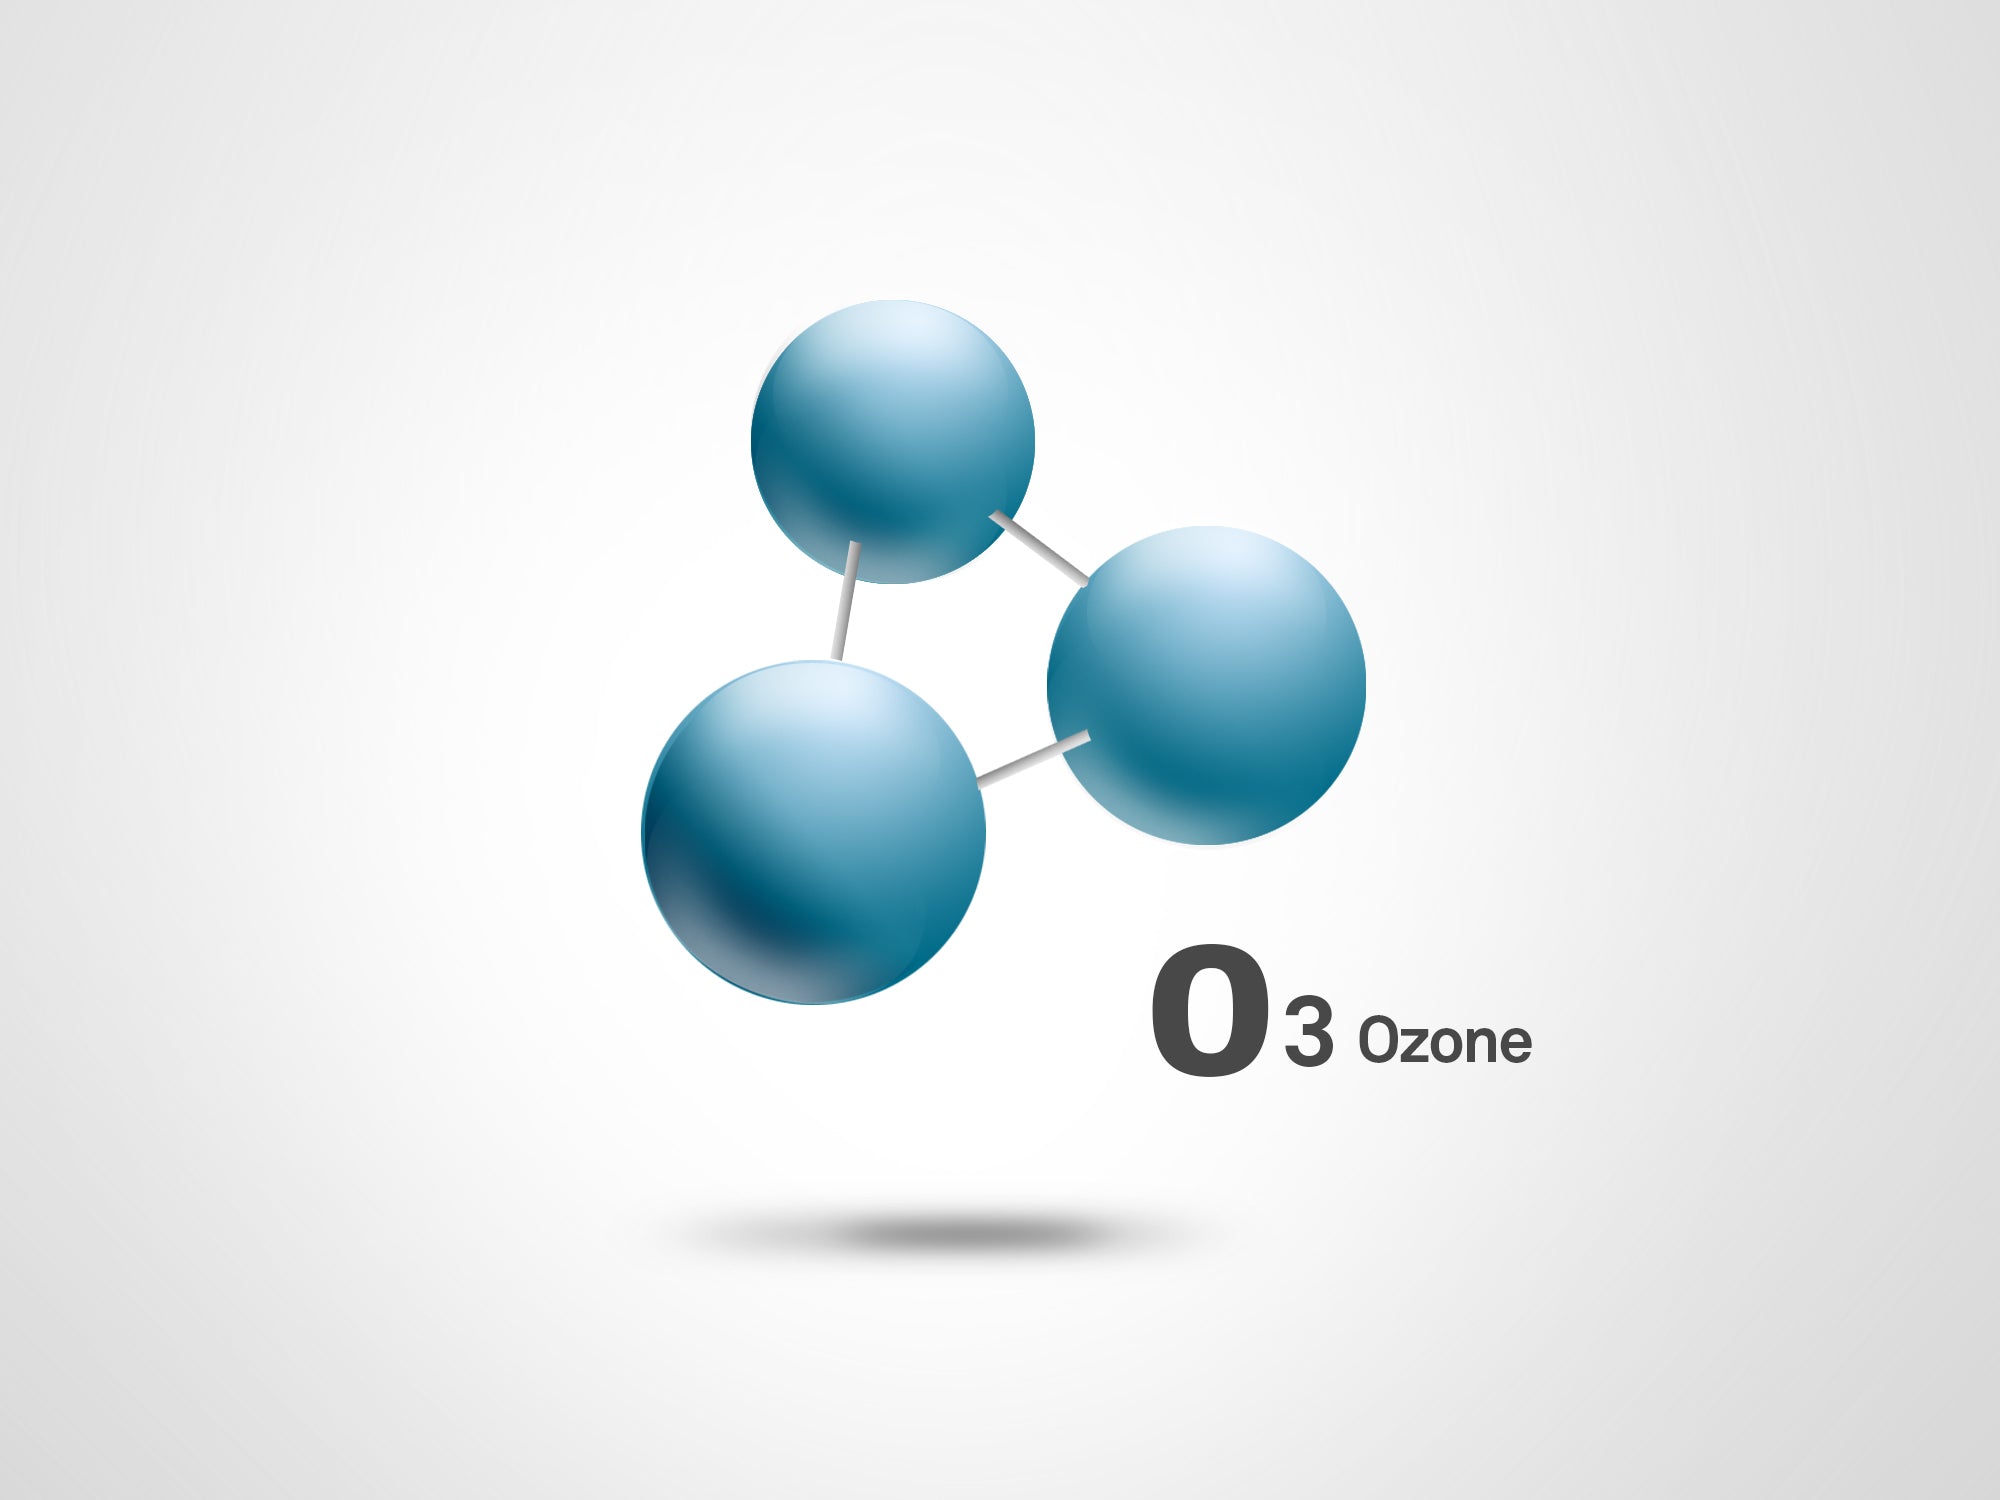 How Do I Know If My Air Purifier Produces Ozone? 